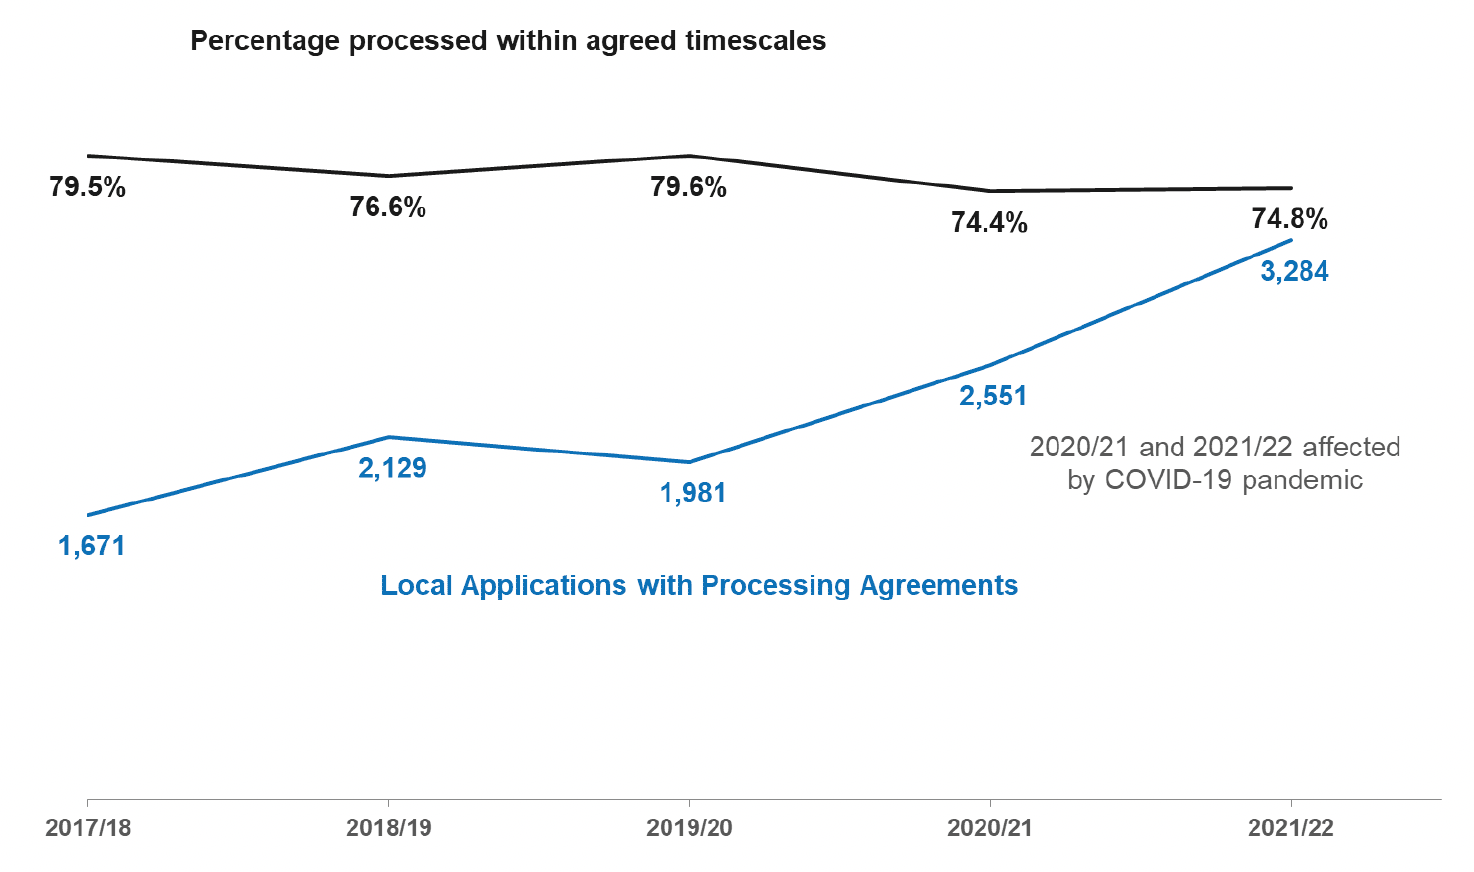 A line chart showing the number of local applications with processing agreements and the percentage processed within agreed timescales since 2017/18. The number of processing agreements has risen in 2020/21 and 2021/22. The percentage within agreed timescales has fallen by nearly 5 percentage points in 2020/21 and 2021/22 to 75%.